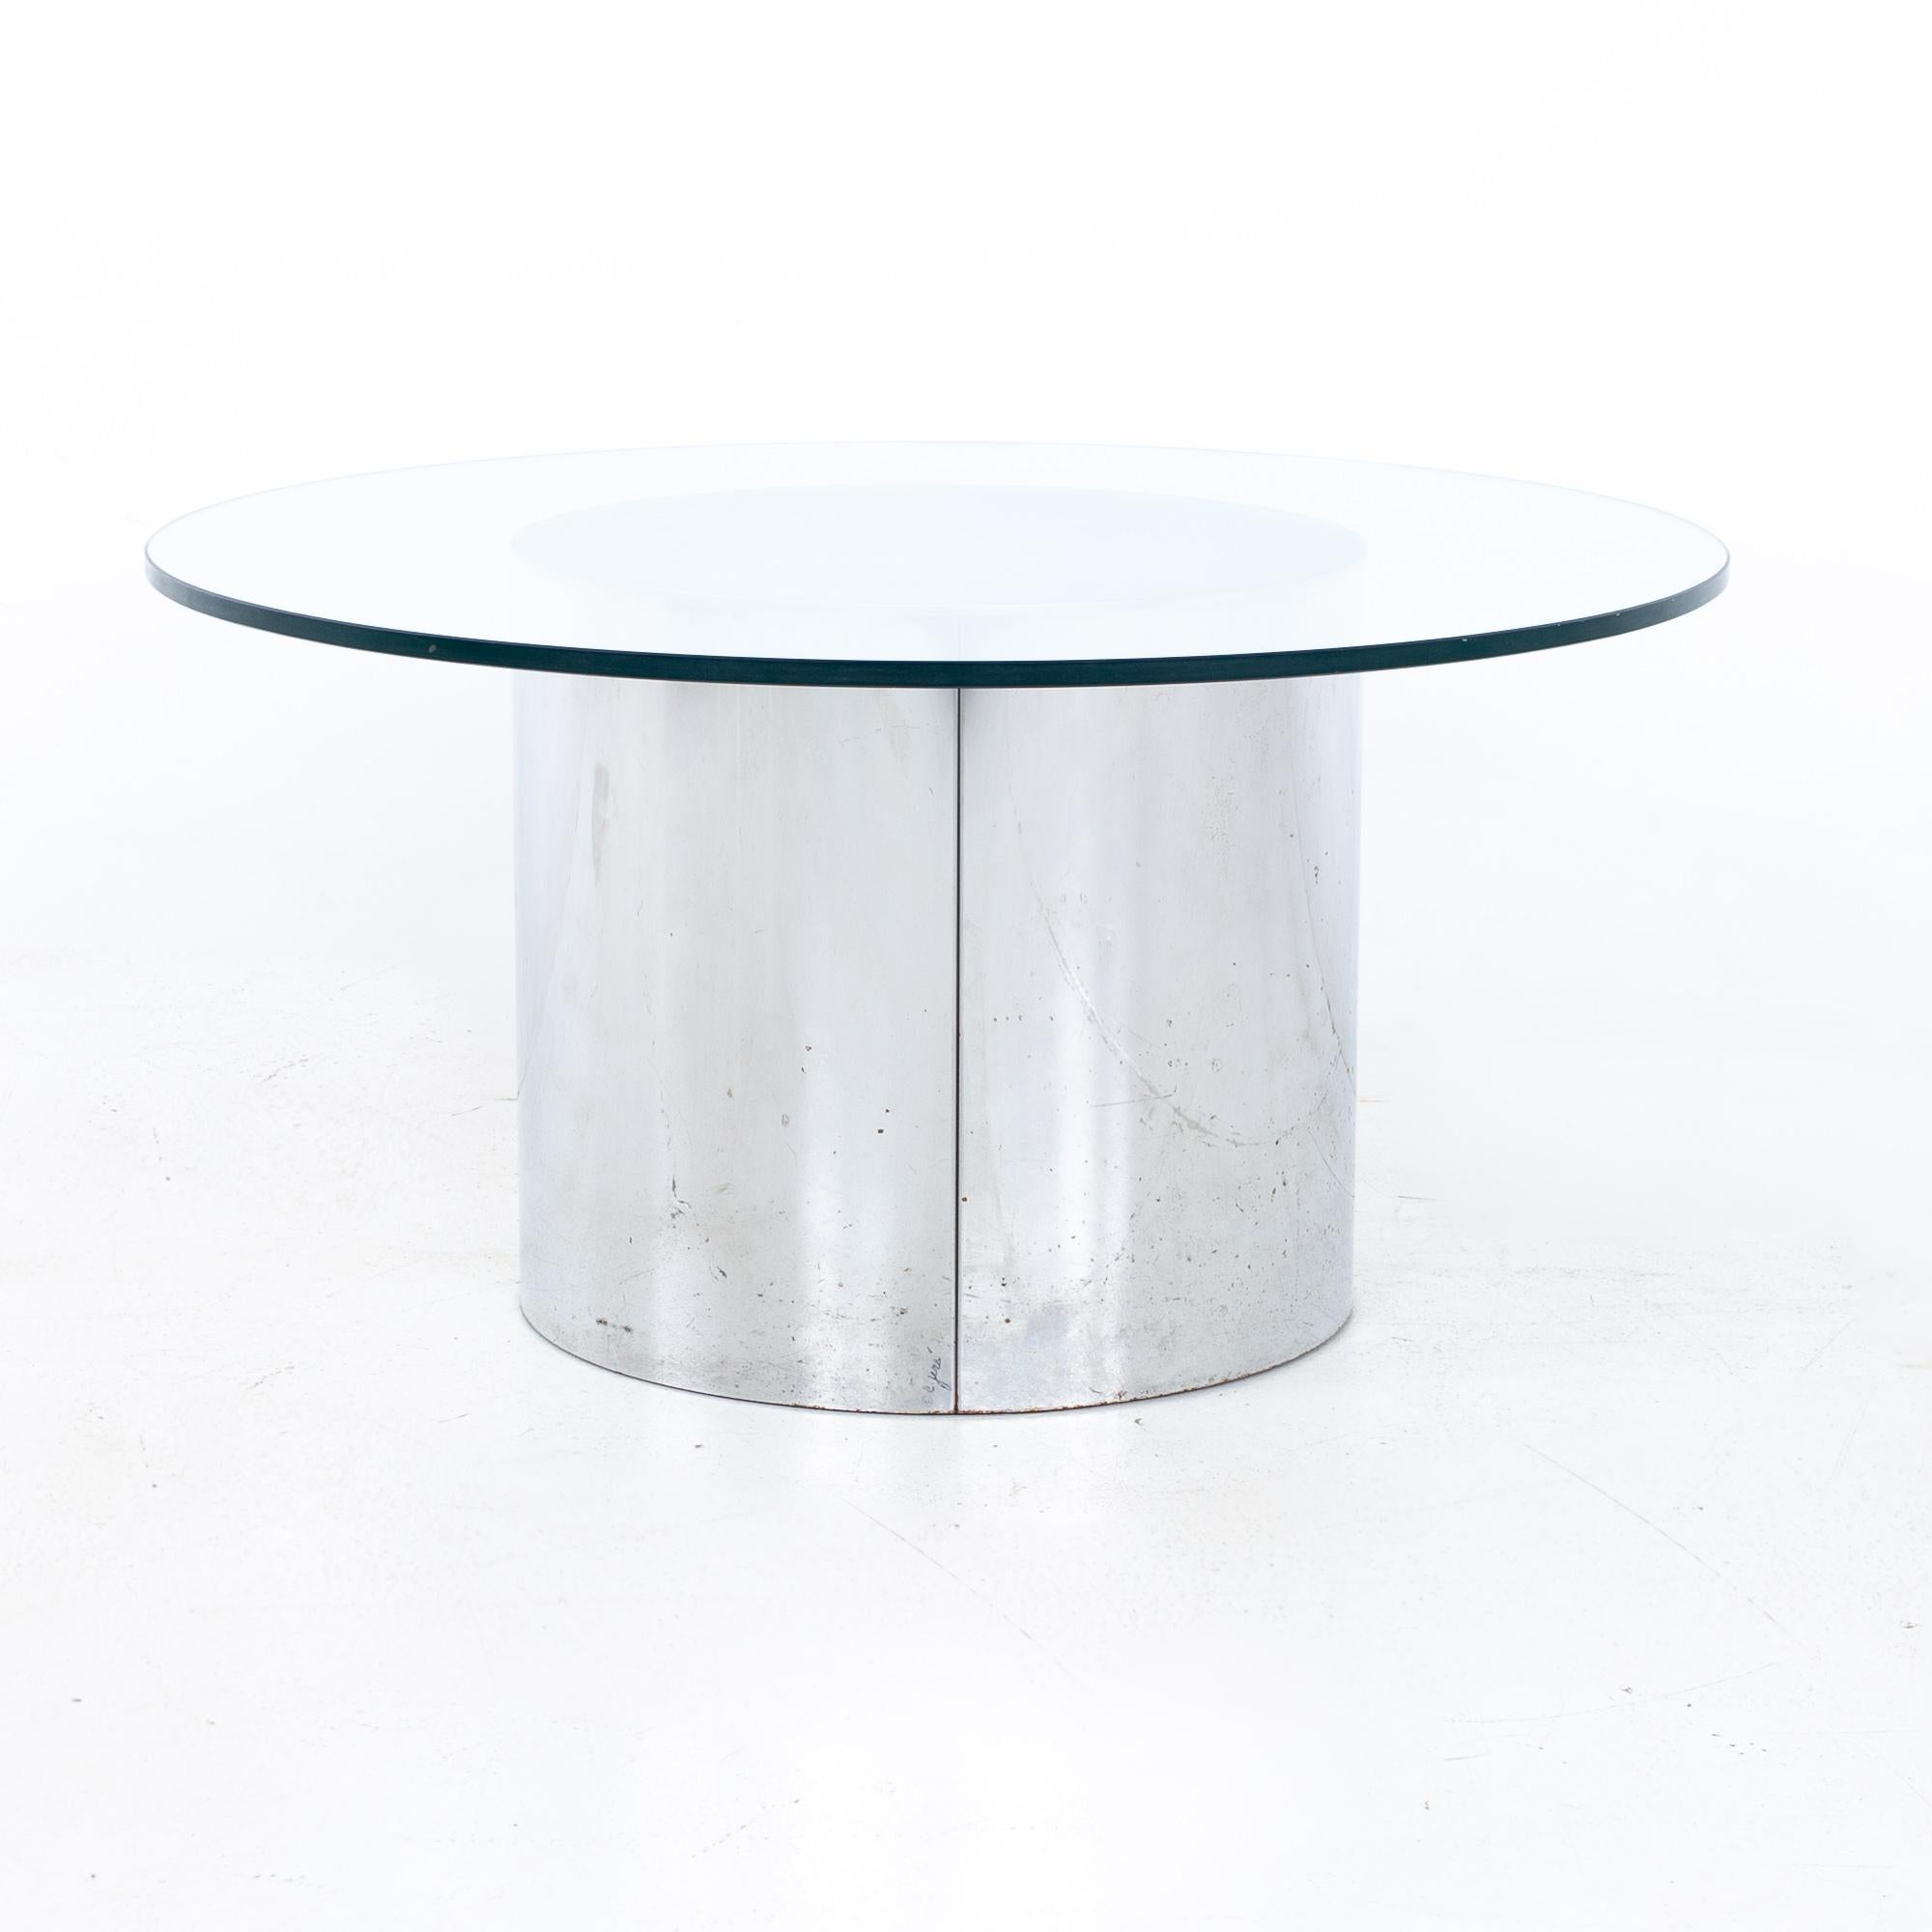 Mid century round glass and chrome coffee table
Table measures: 32 wide x 32 deep x 16 inches high

The base of the table is rusted, scratched, and dented. The glass top also is scratched

Each piece is carefully cleaned and packaged before